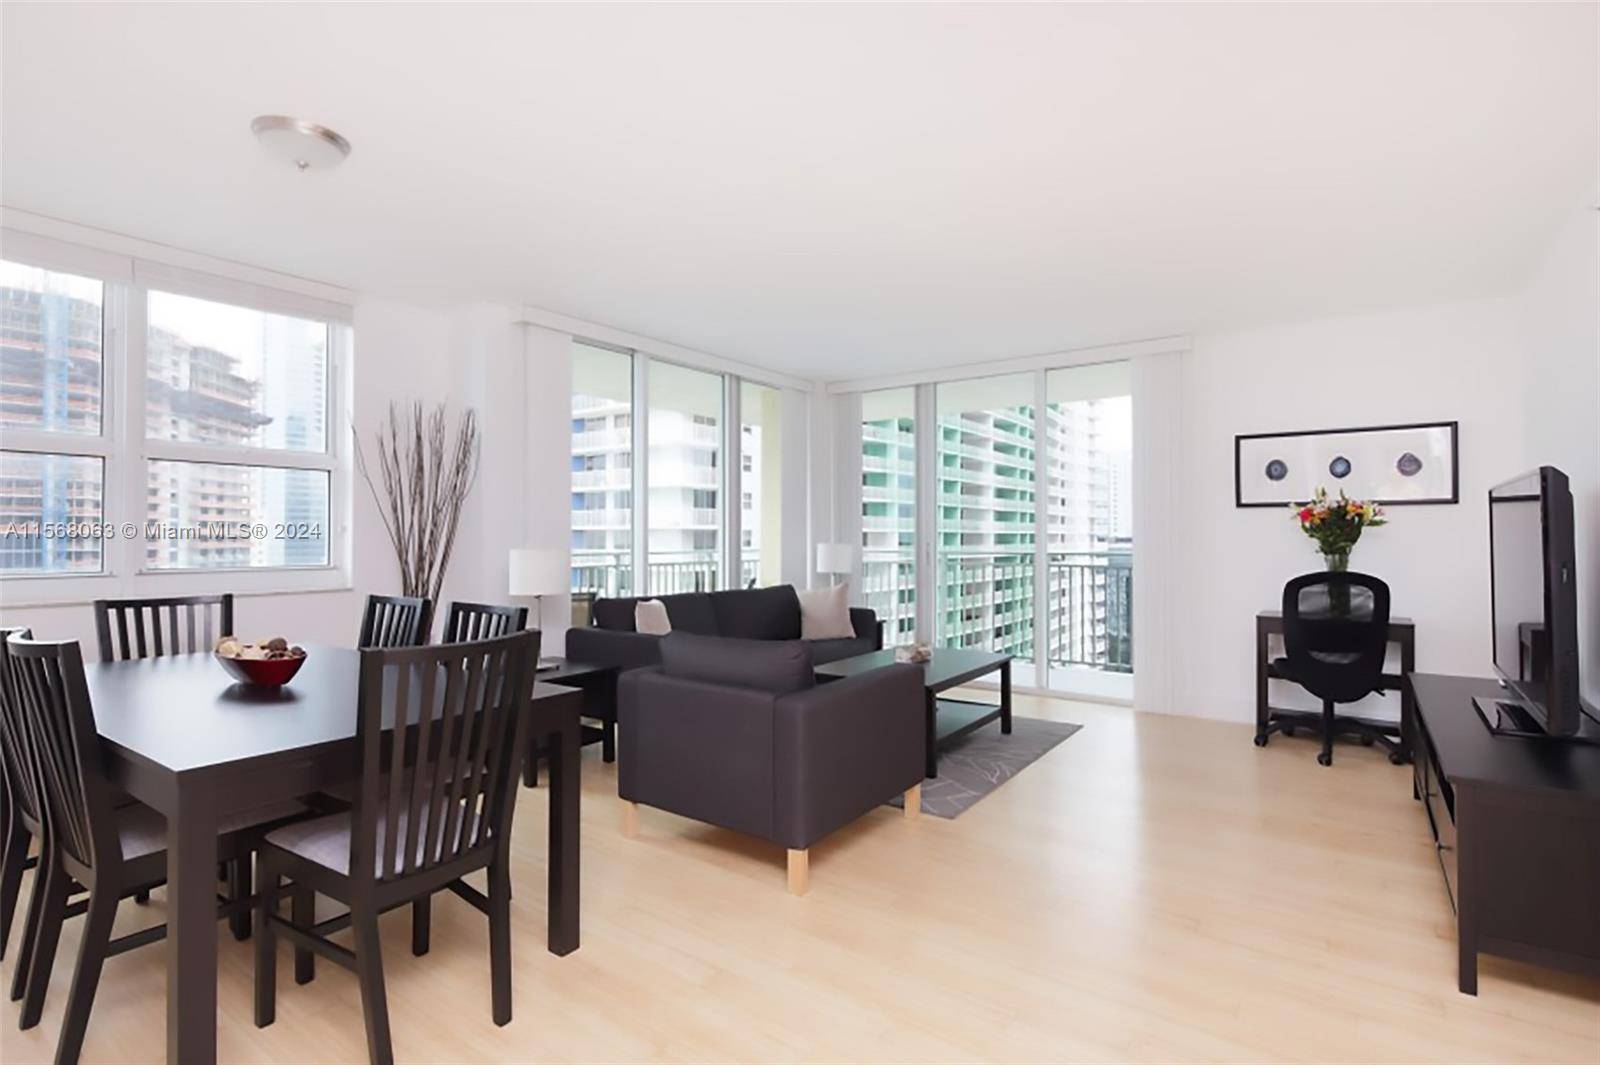 Enjoy living in the luxurious The Mark building located in the heart of the financial district at Brickell Bay Drive.